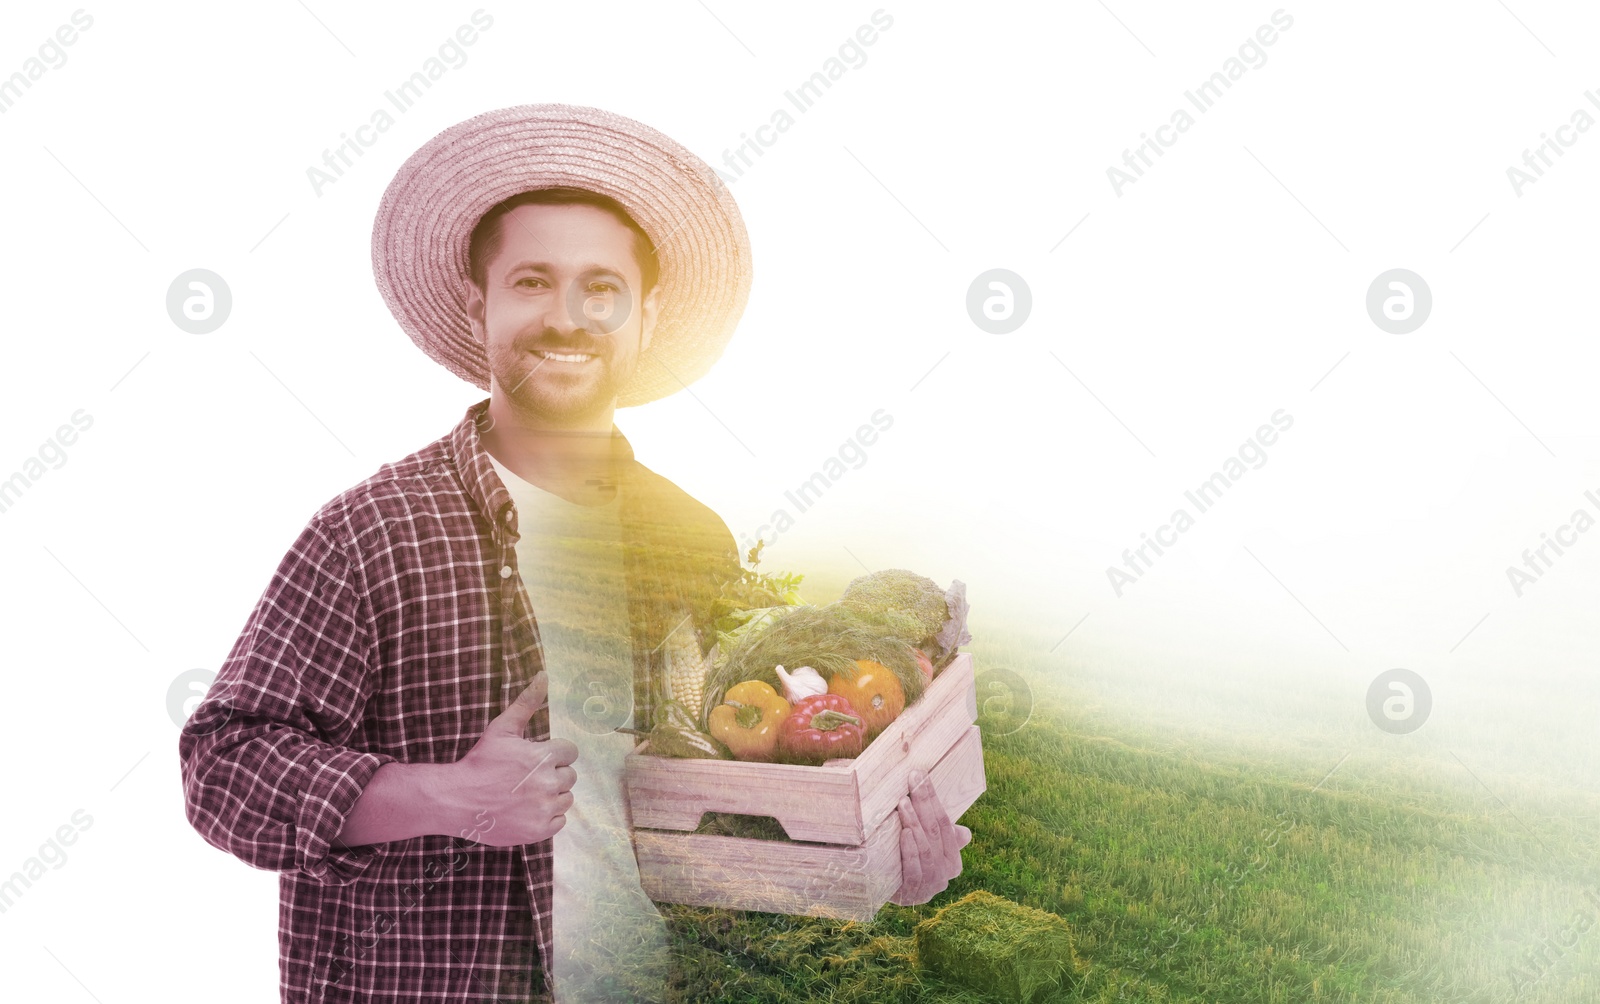 Image of Double exposure of farmer and agricultural field on white background